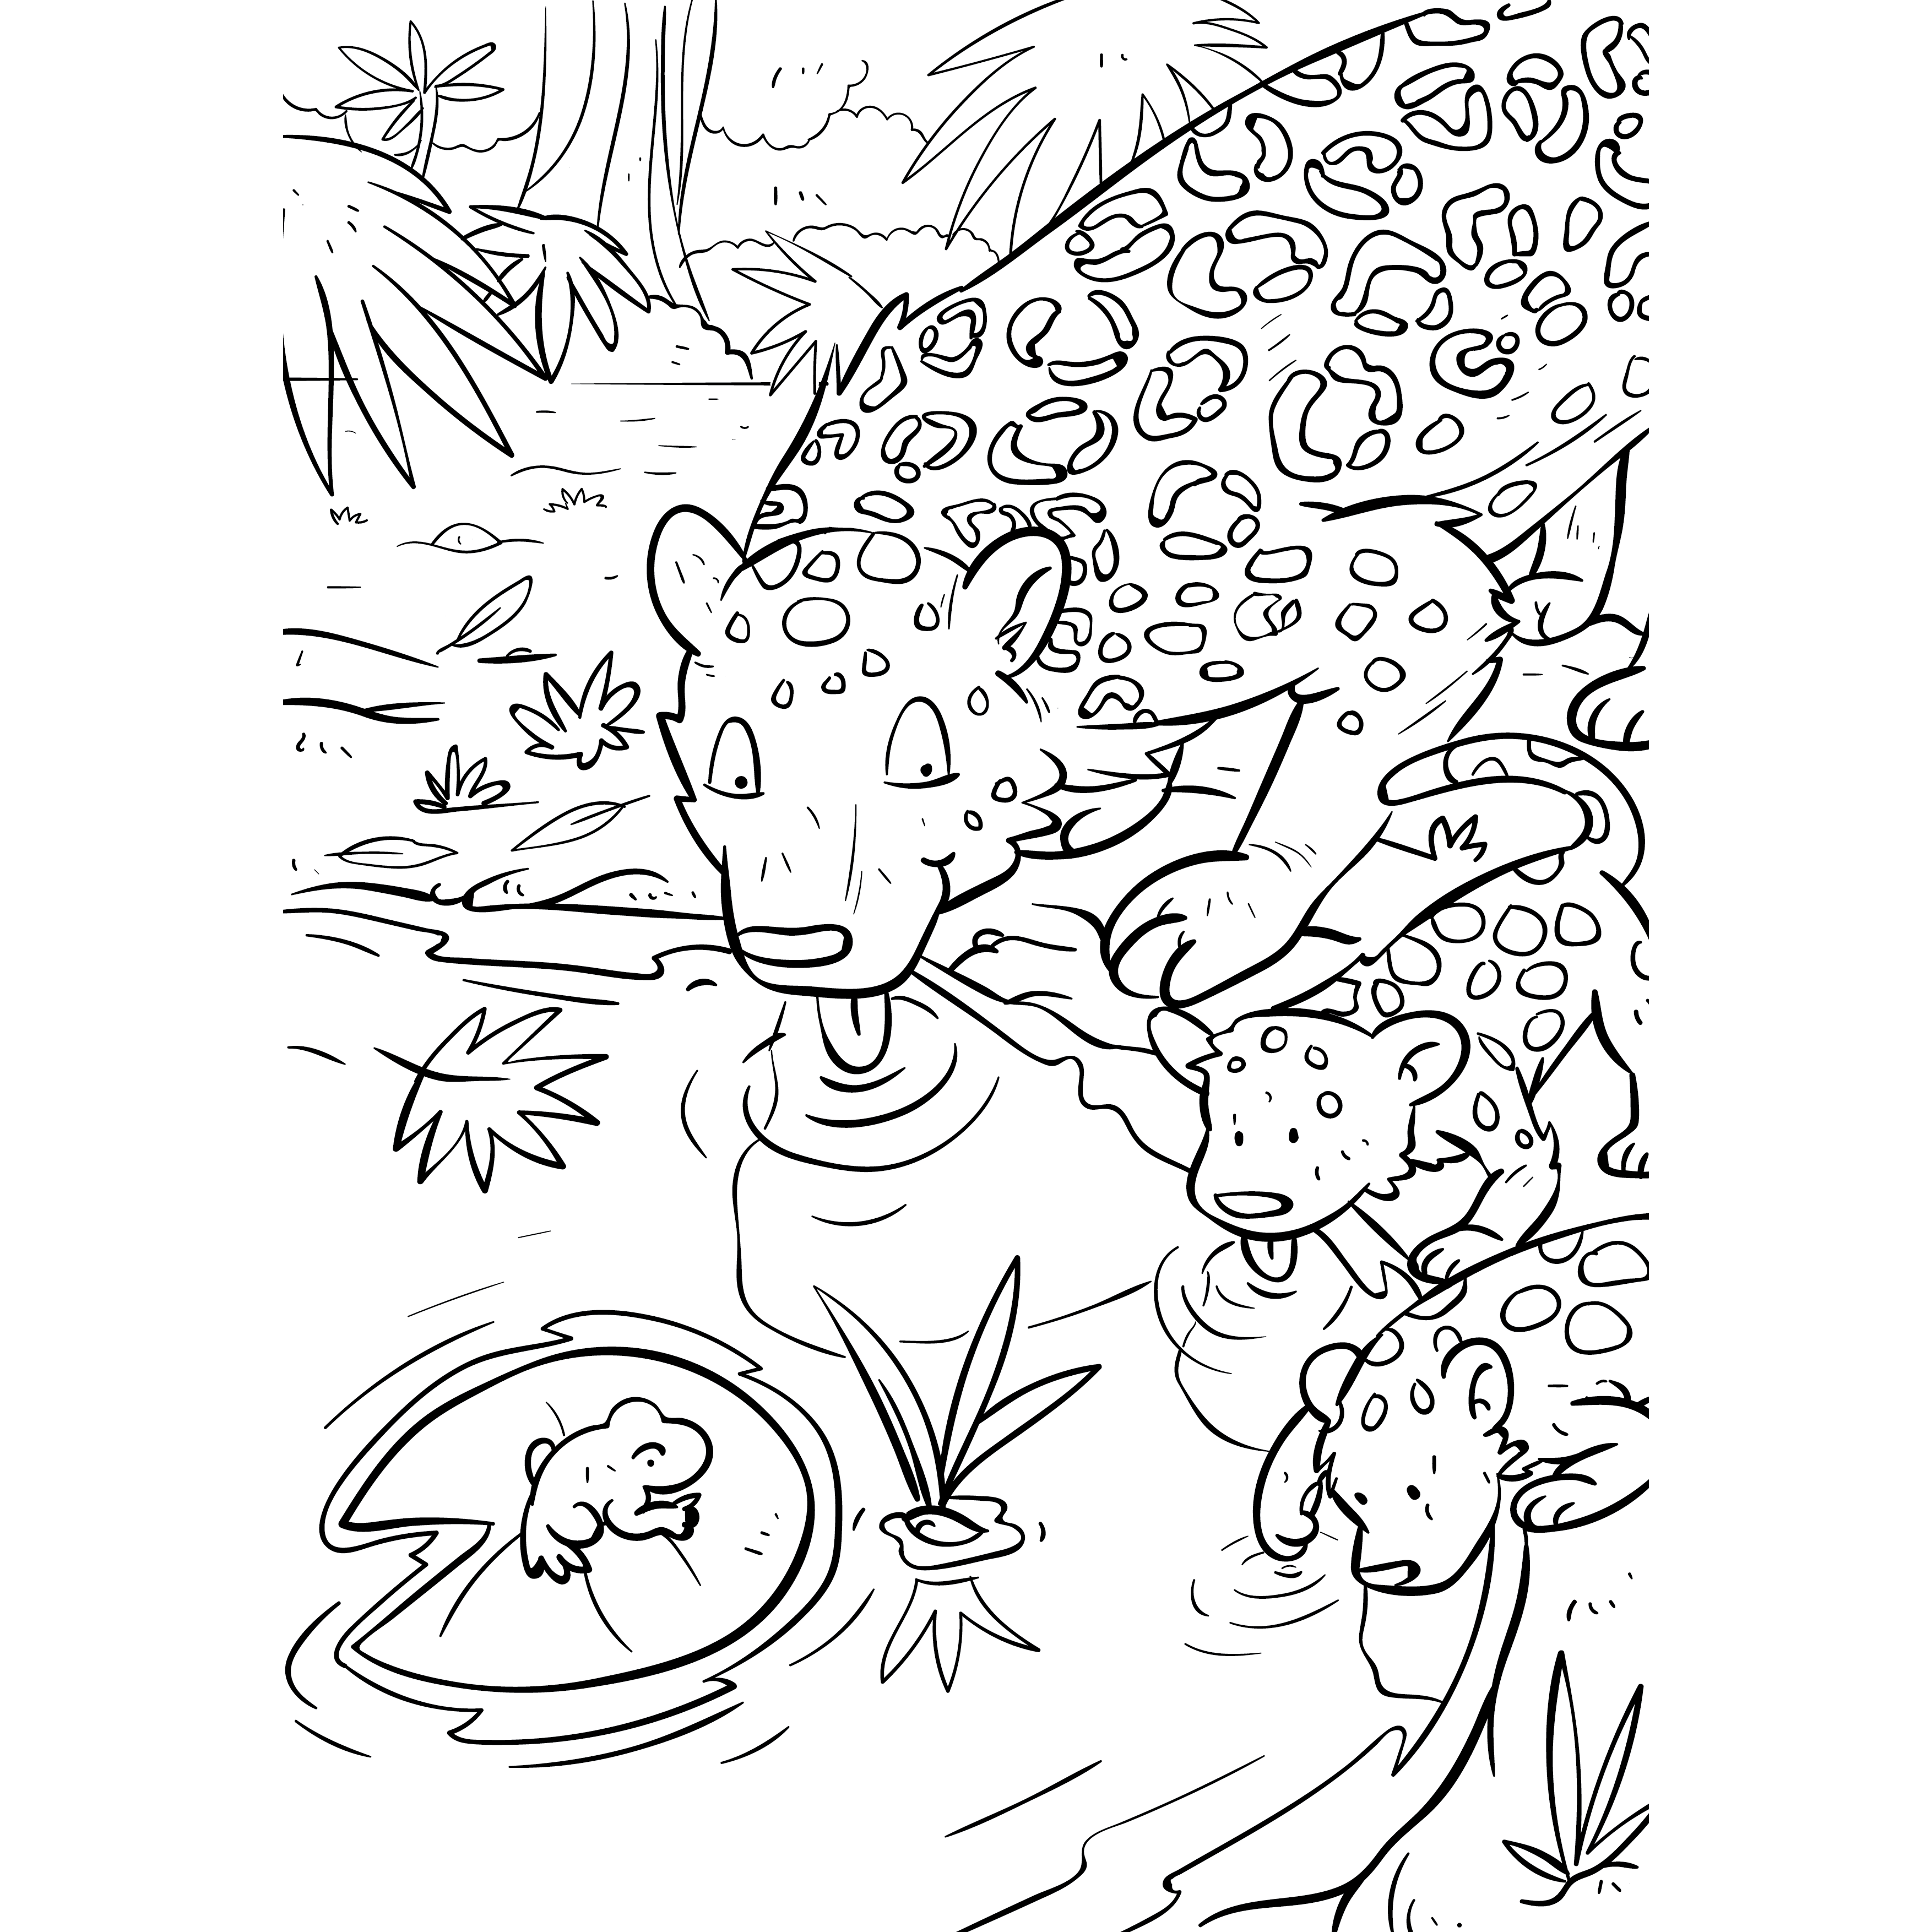 Legacy Bound-World of Animals Coloring Book - Digital Download-11713-Legacy Toys